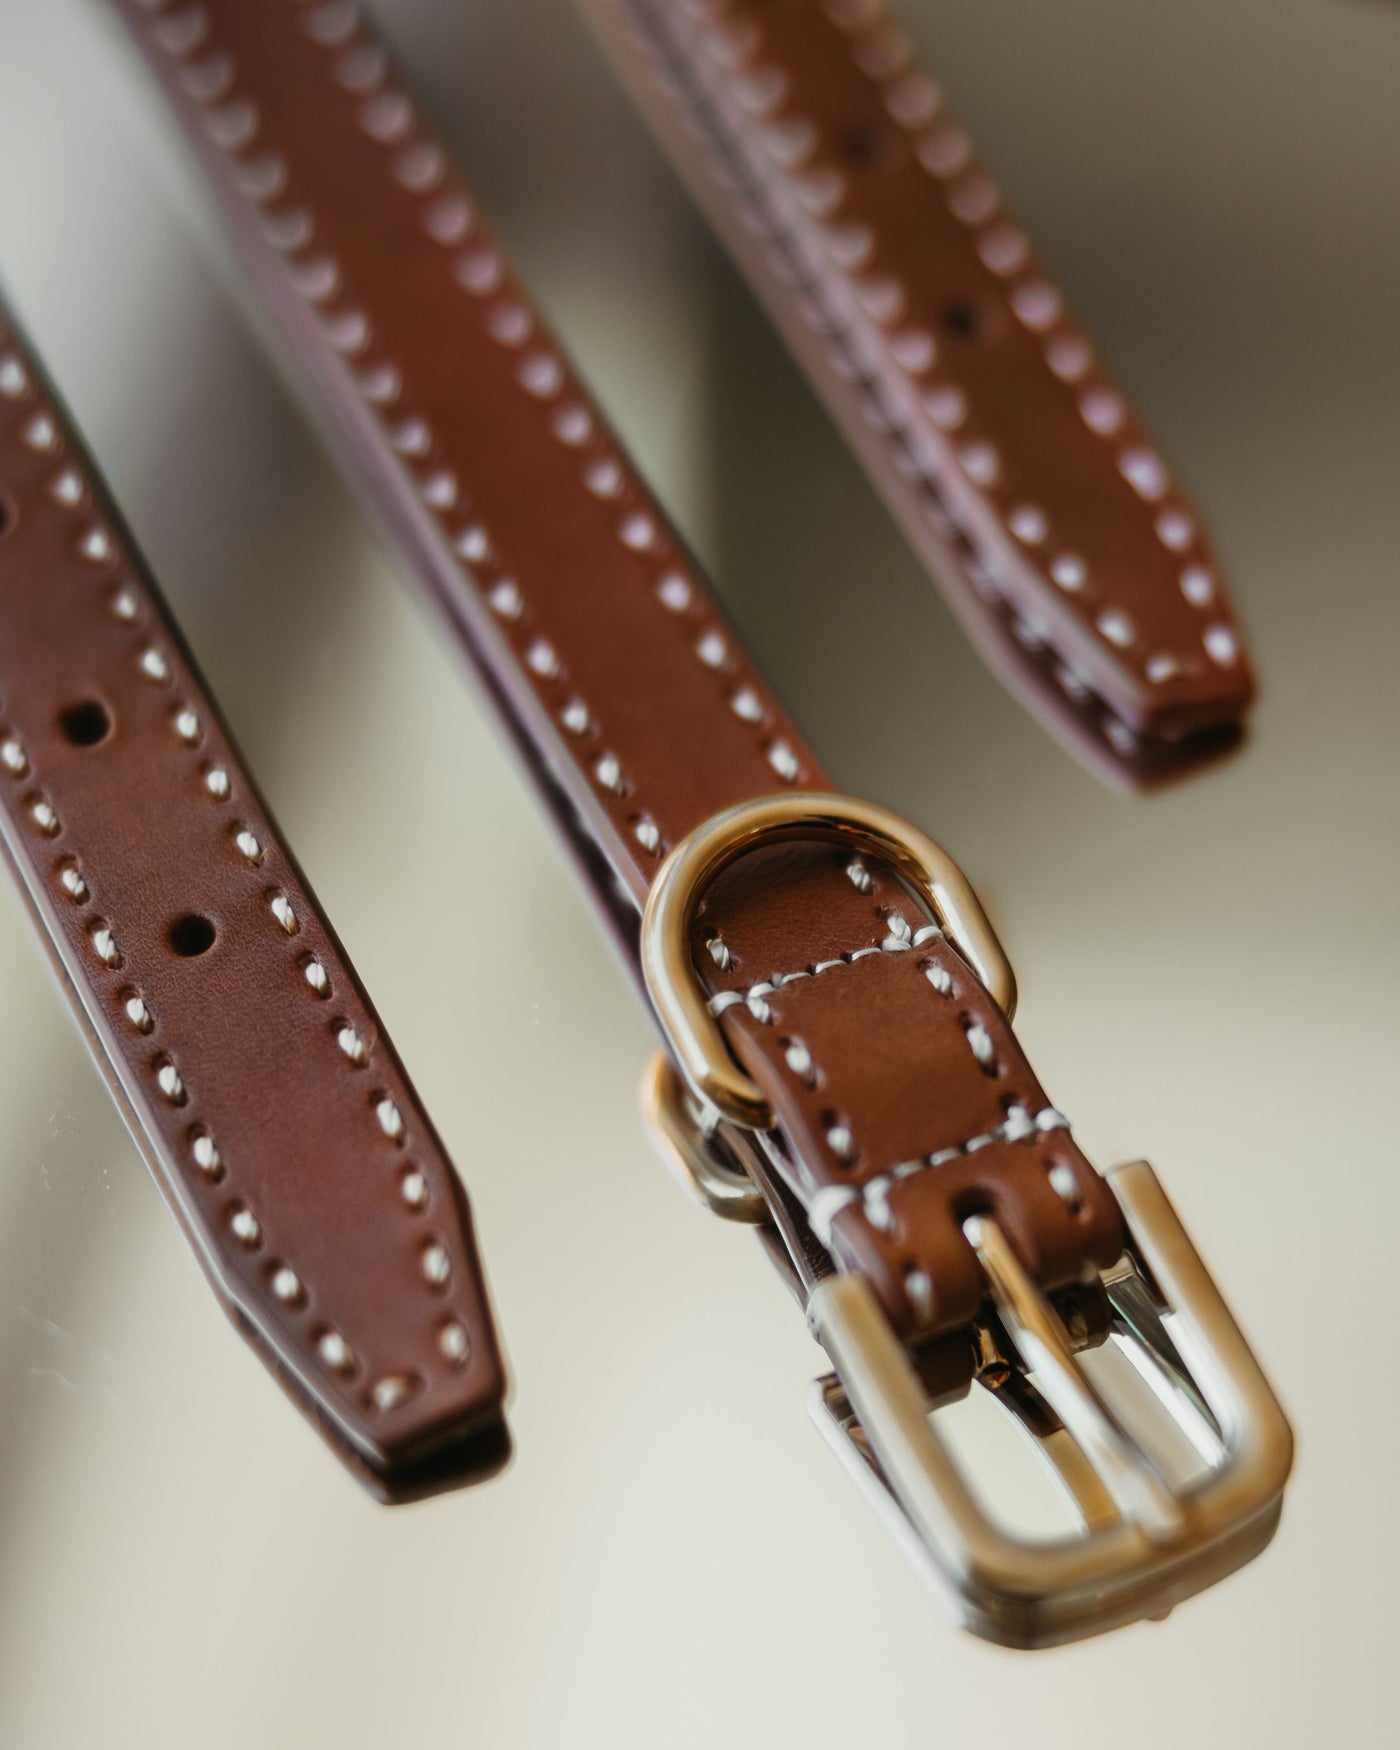 Take the Lead Tan Leather Collar Product Image Detail